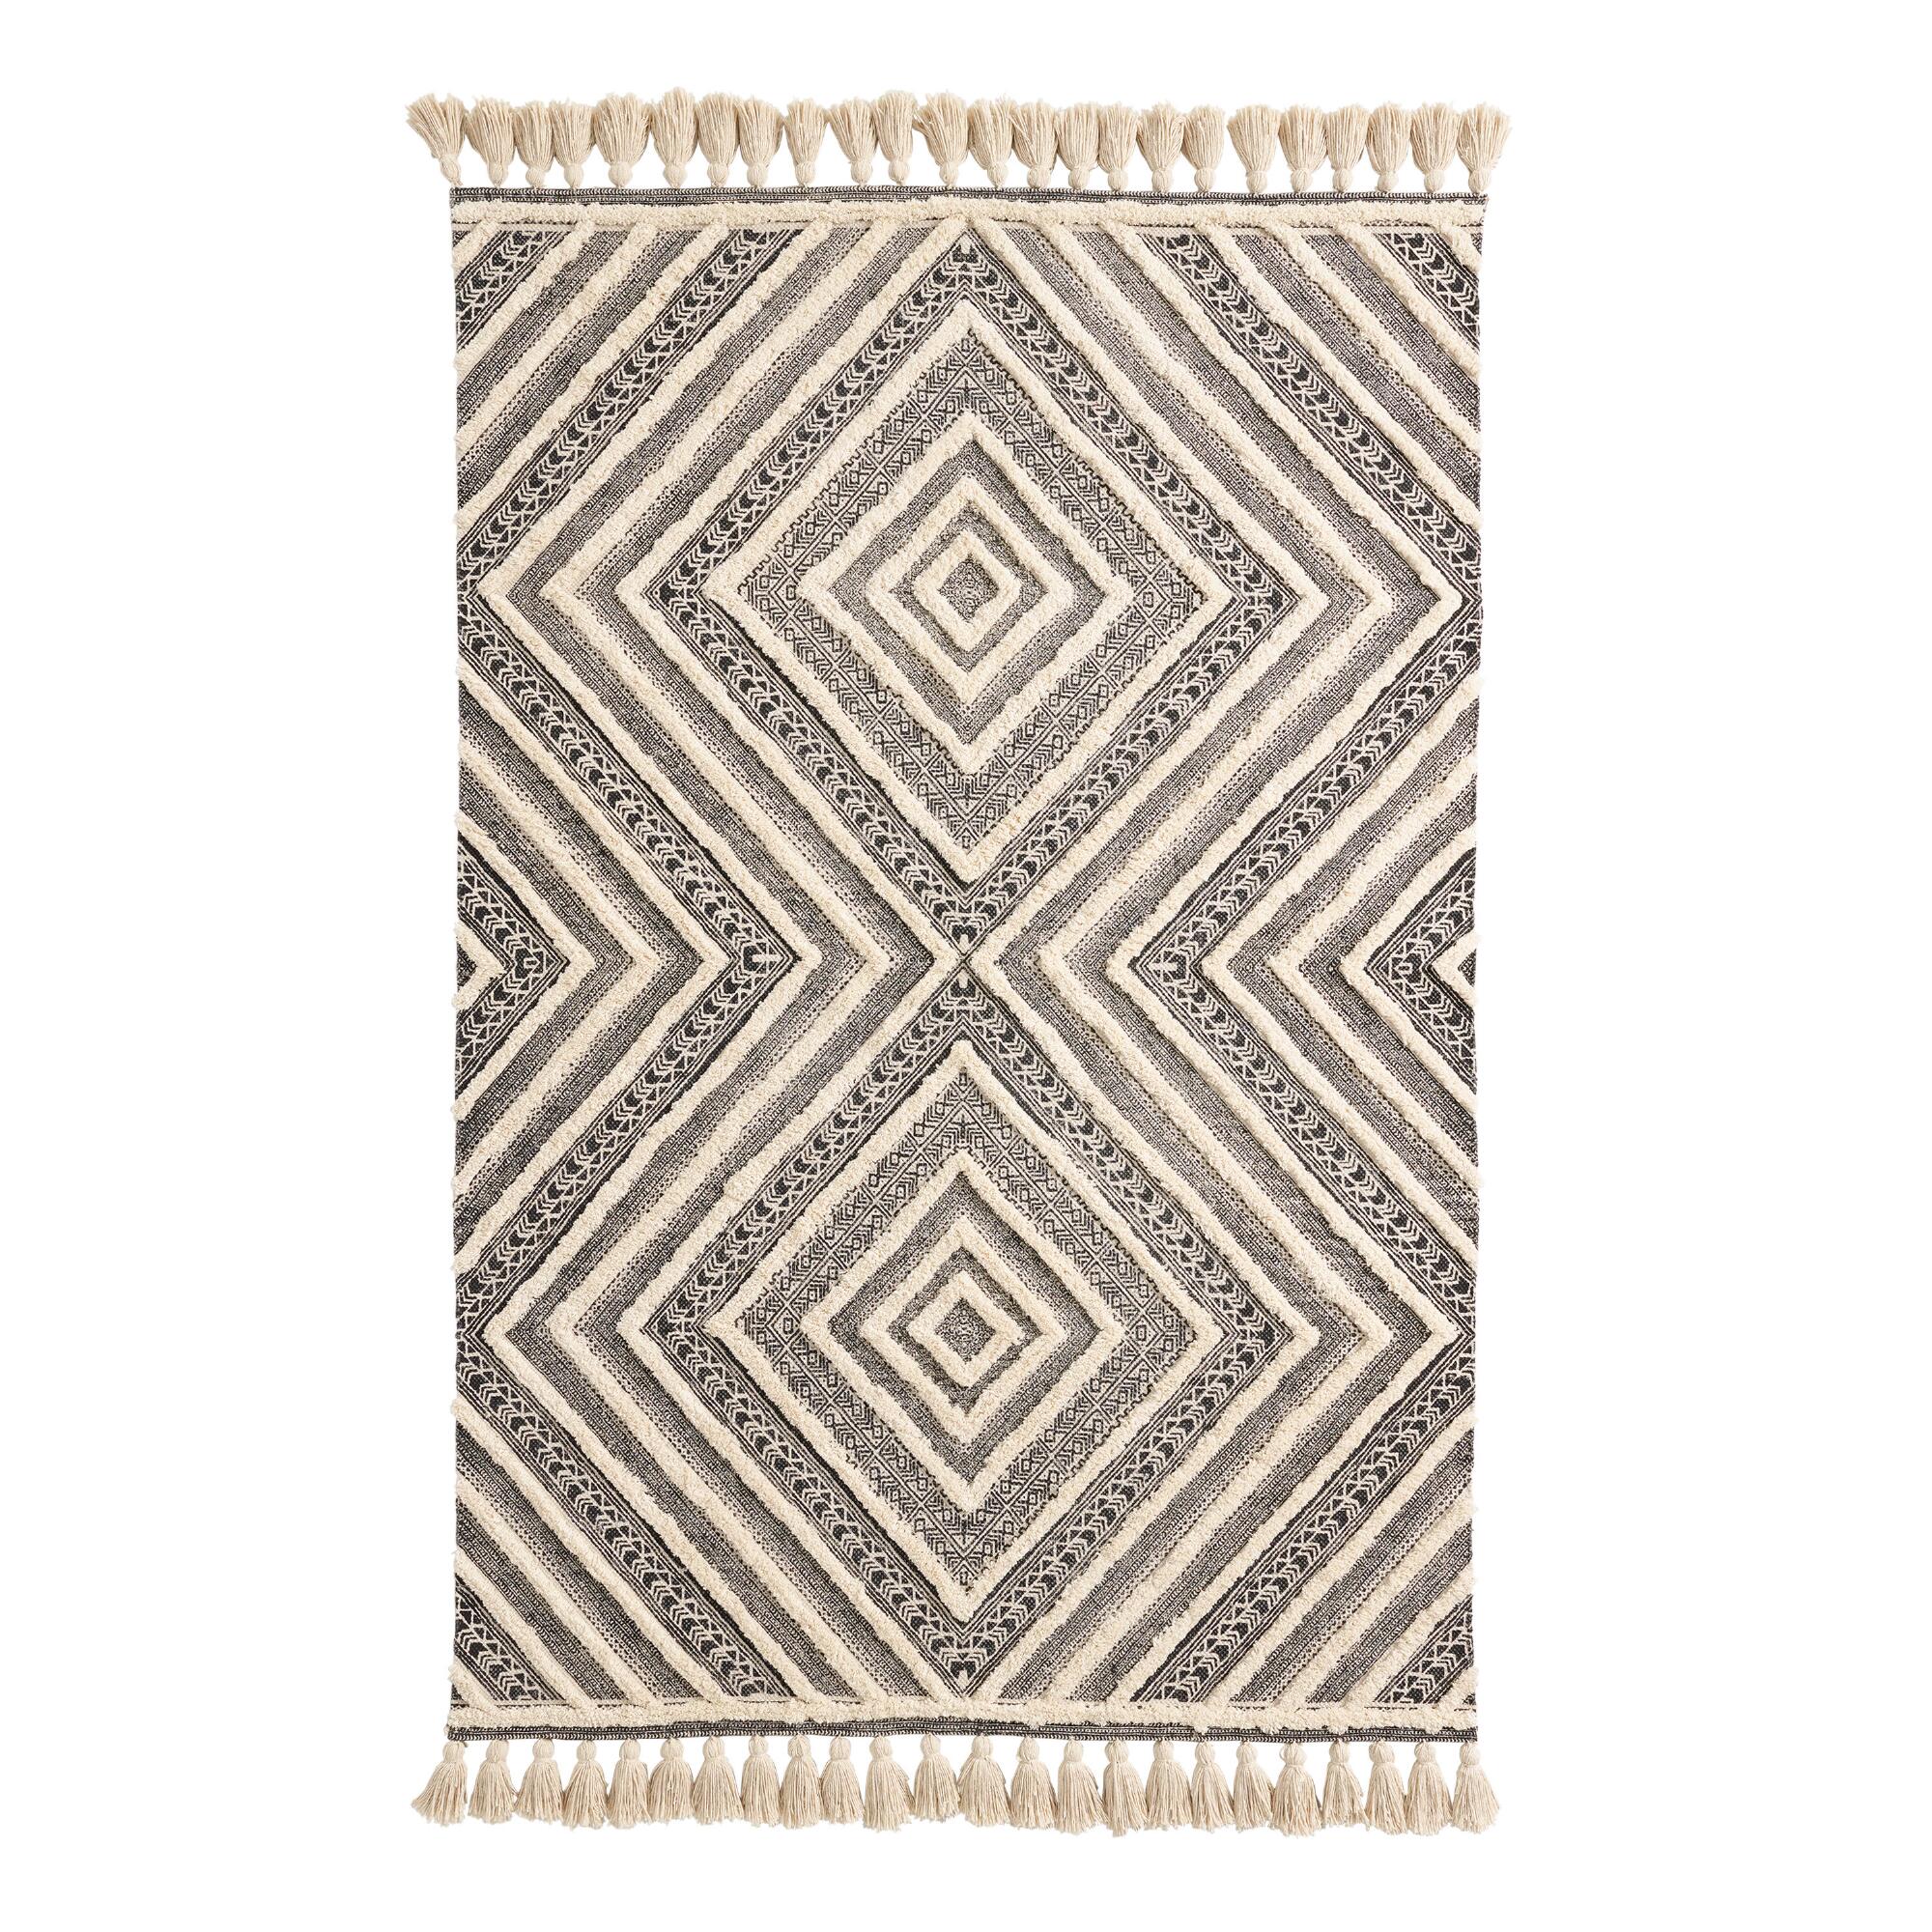 Black and Ivory Tufted Diamond Area Rug - Cotton - 4' x 6' by World Market